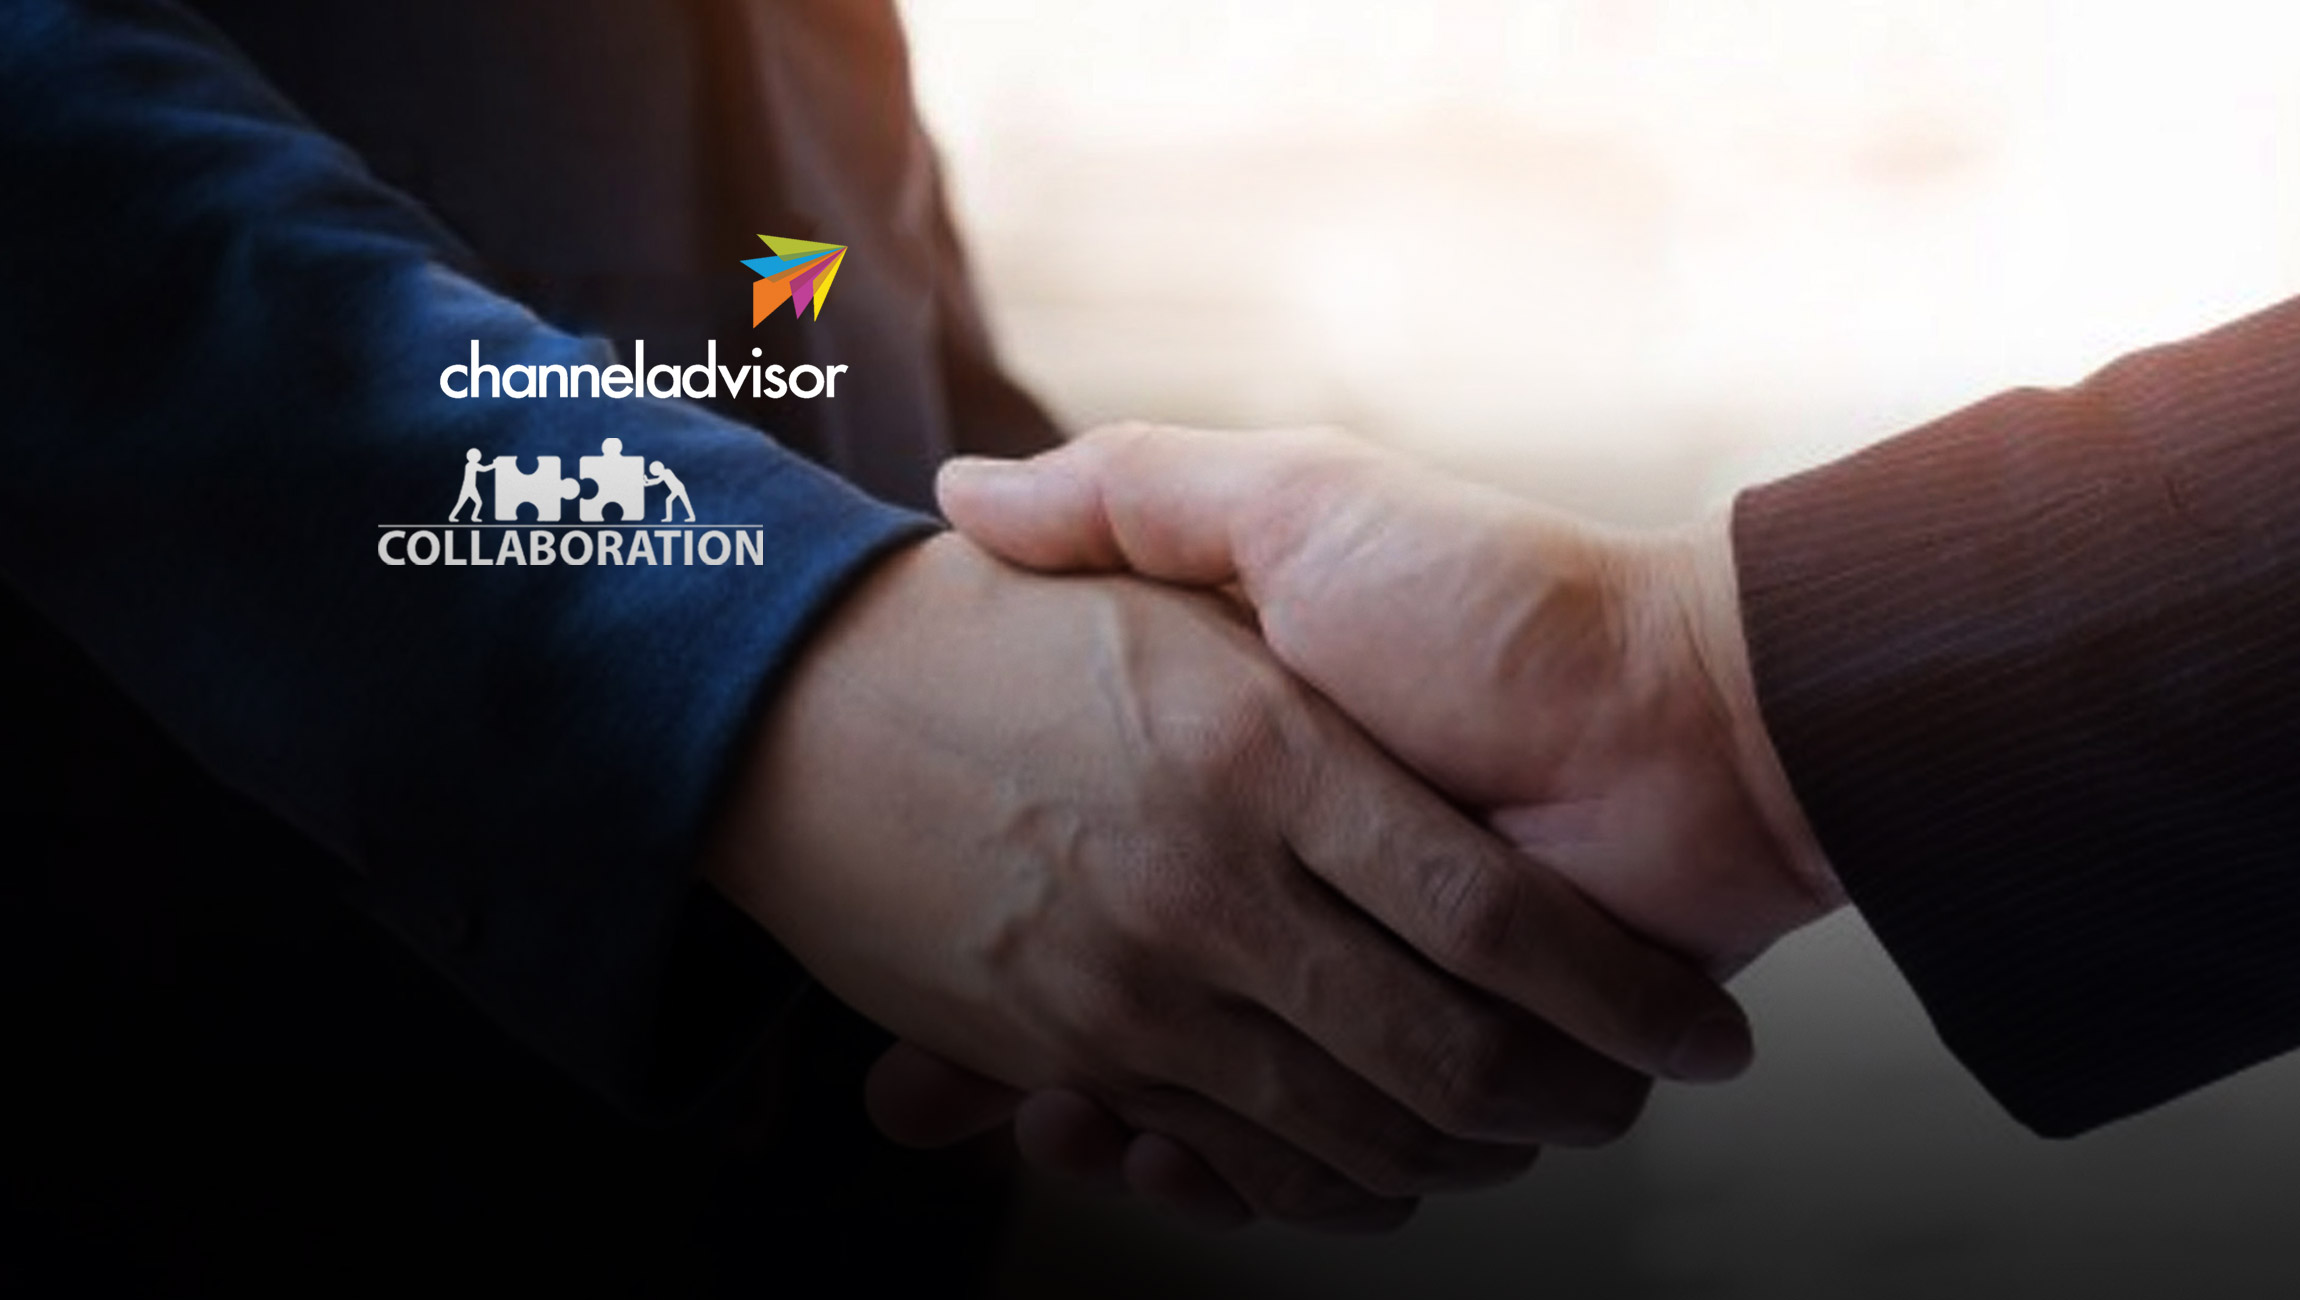 ChannelAdvisor partners with ShipStation and Launches ChannelAdvisor Starter Edition